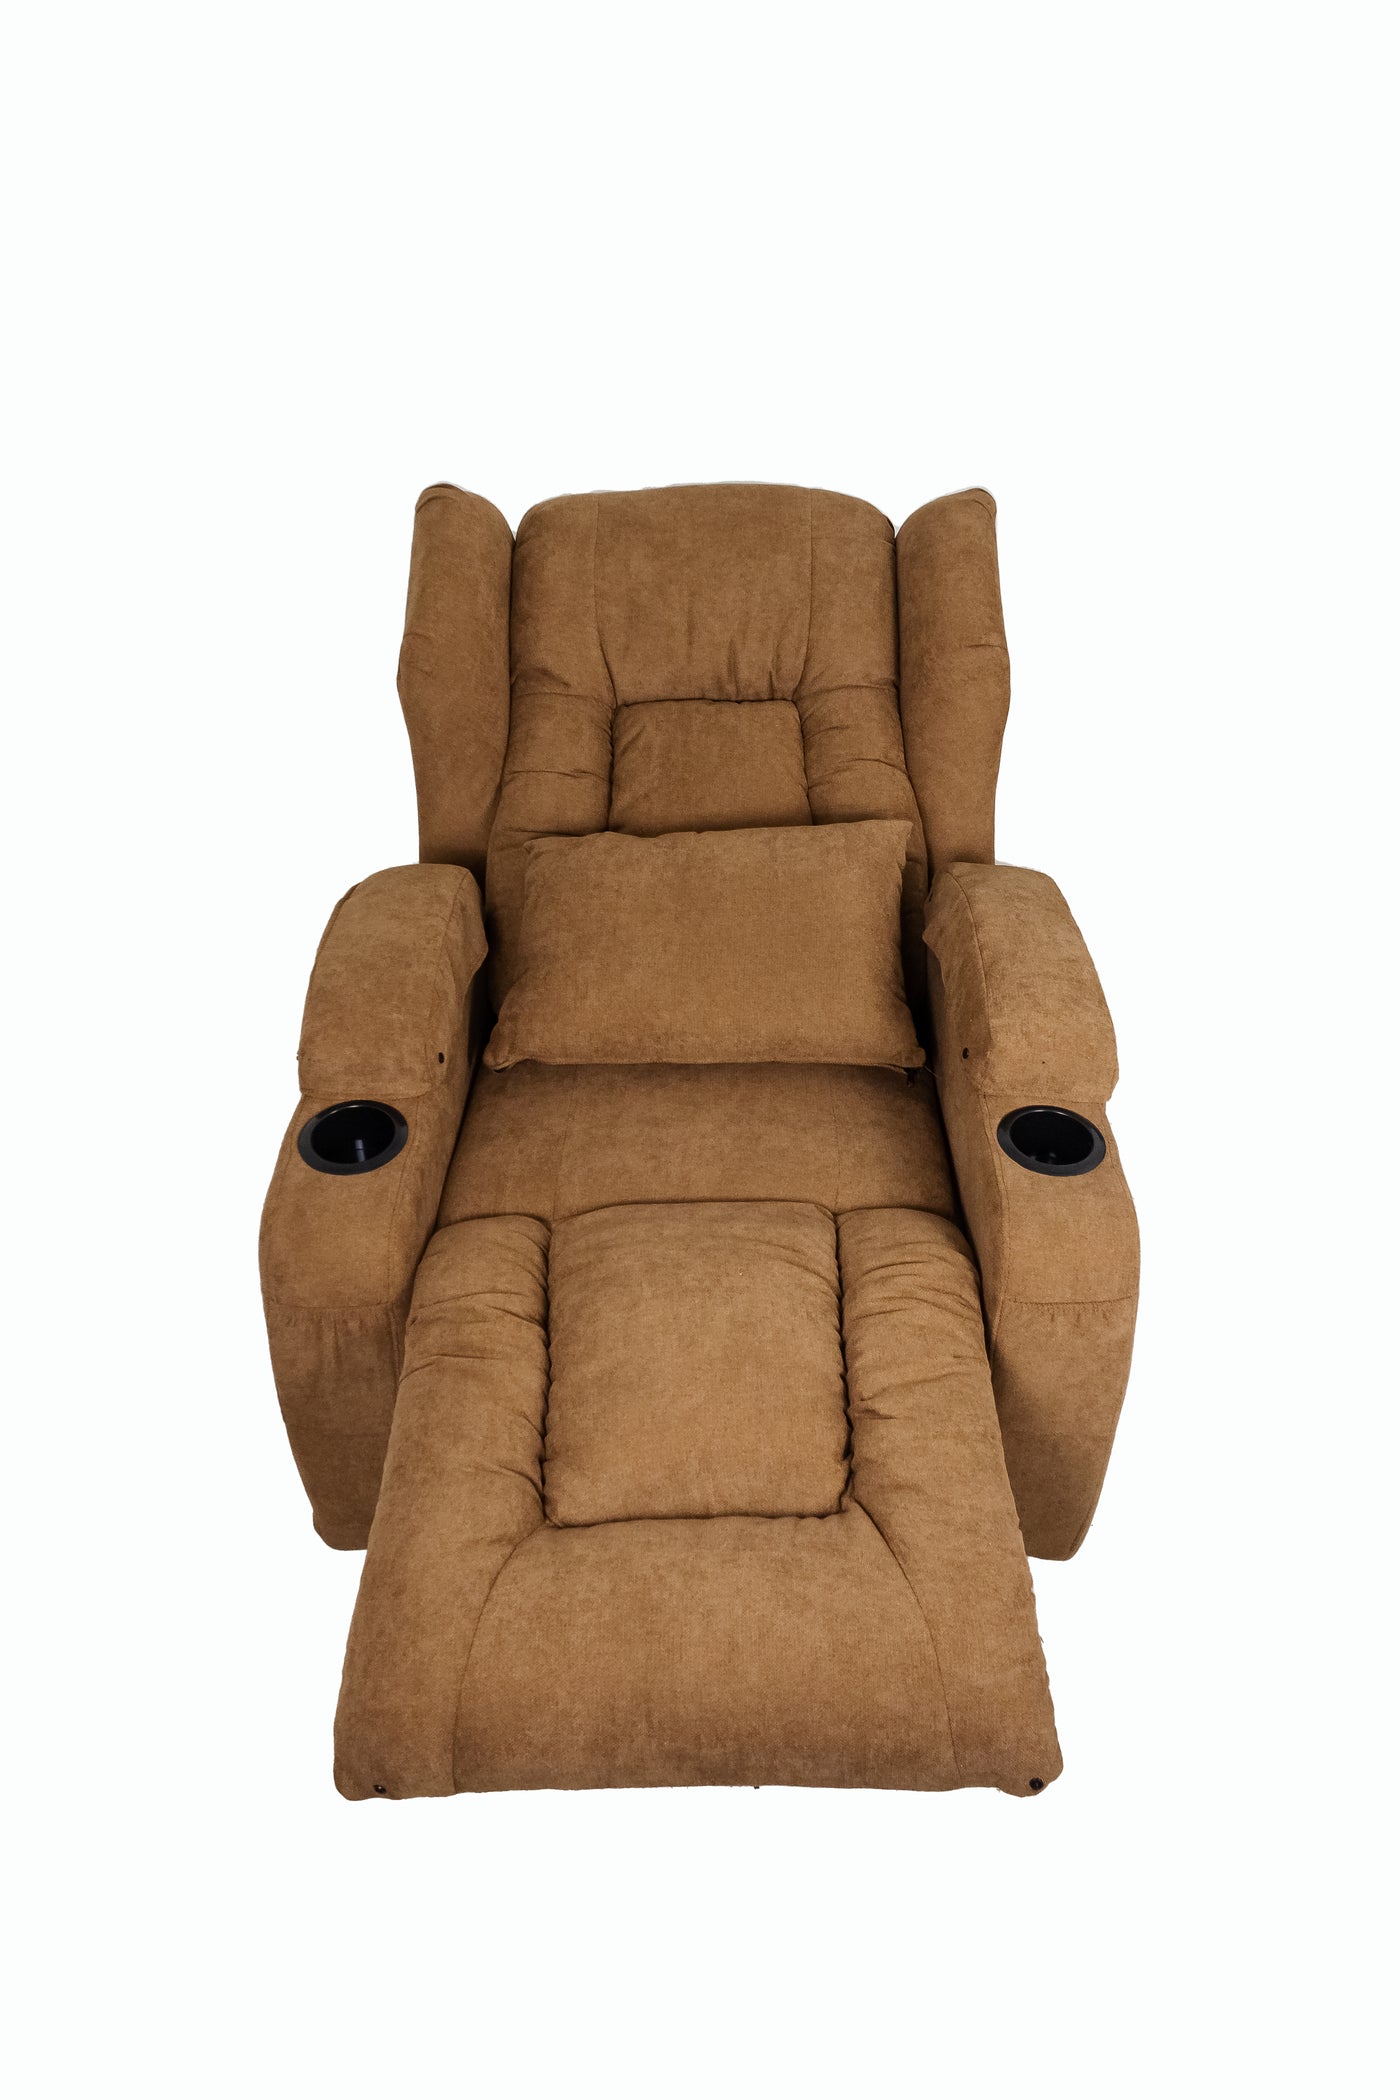 Diana Single Seater Recliner Couch